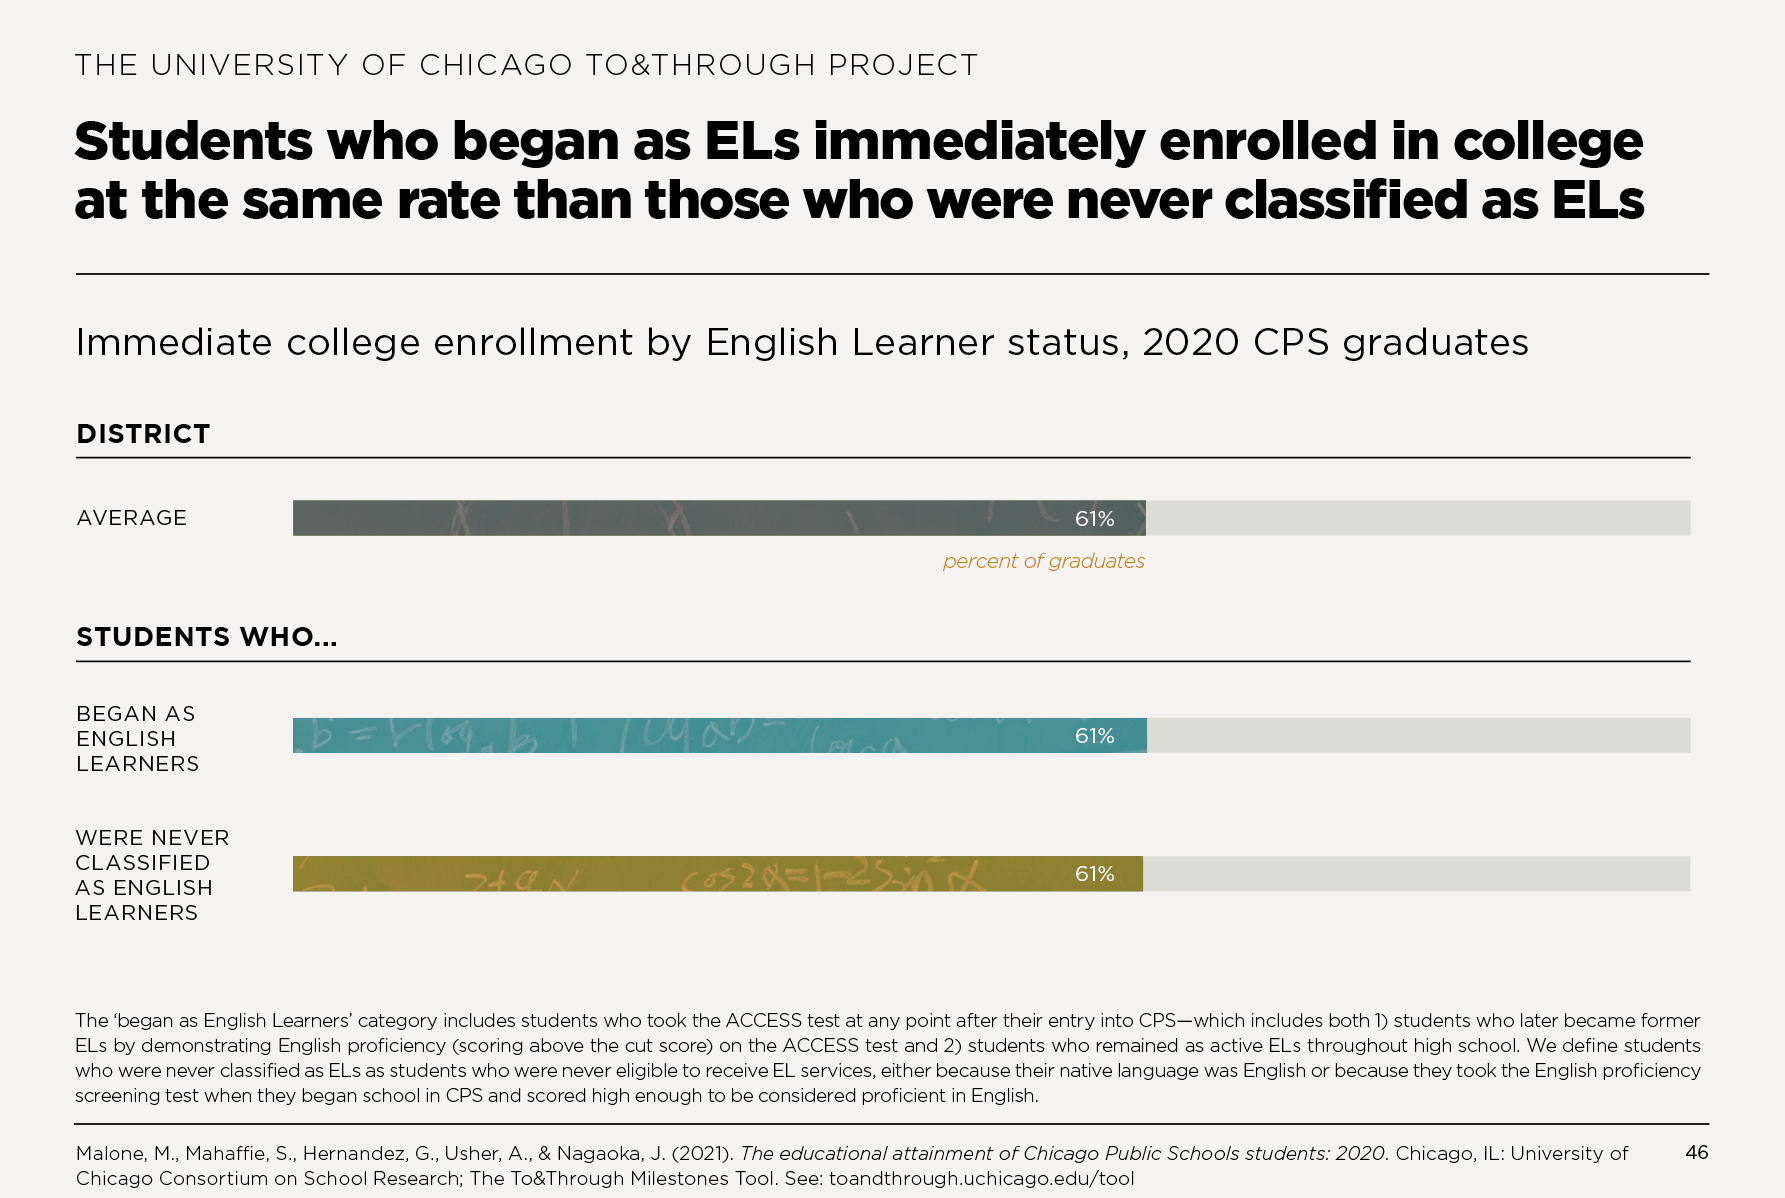 Students who began as ELs immediately enrolled in college at the same rate than those who were never classified as ELs